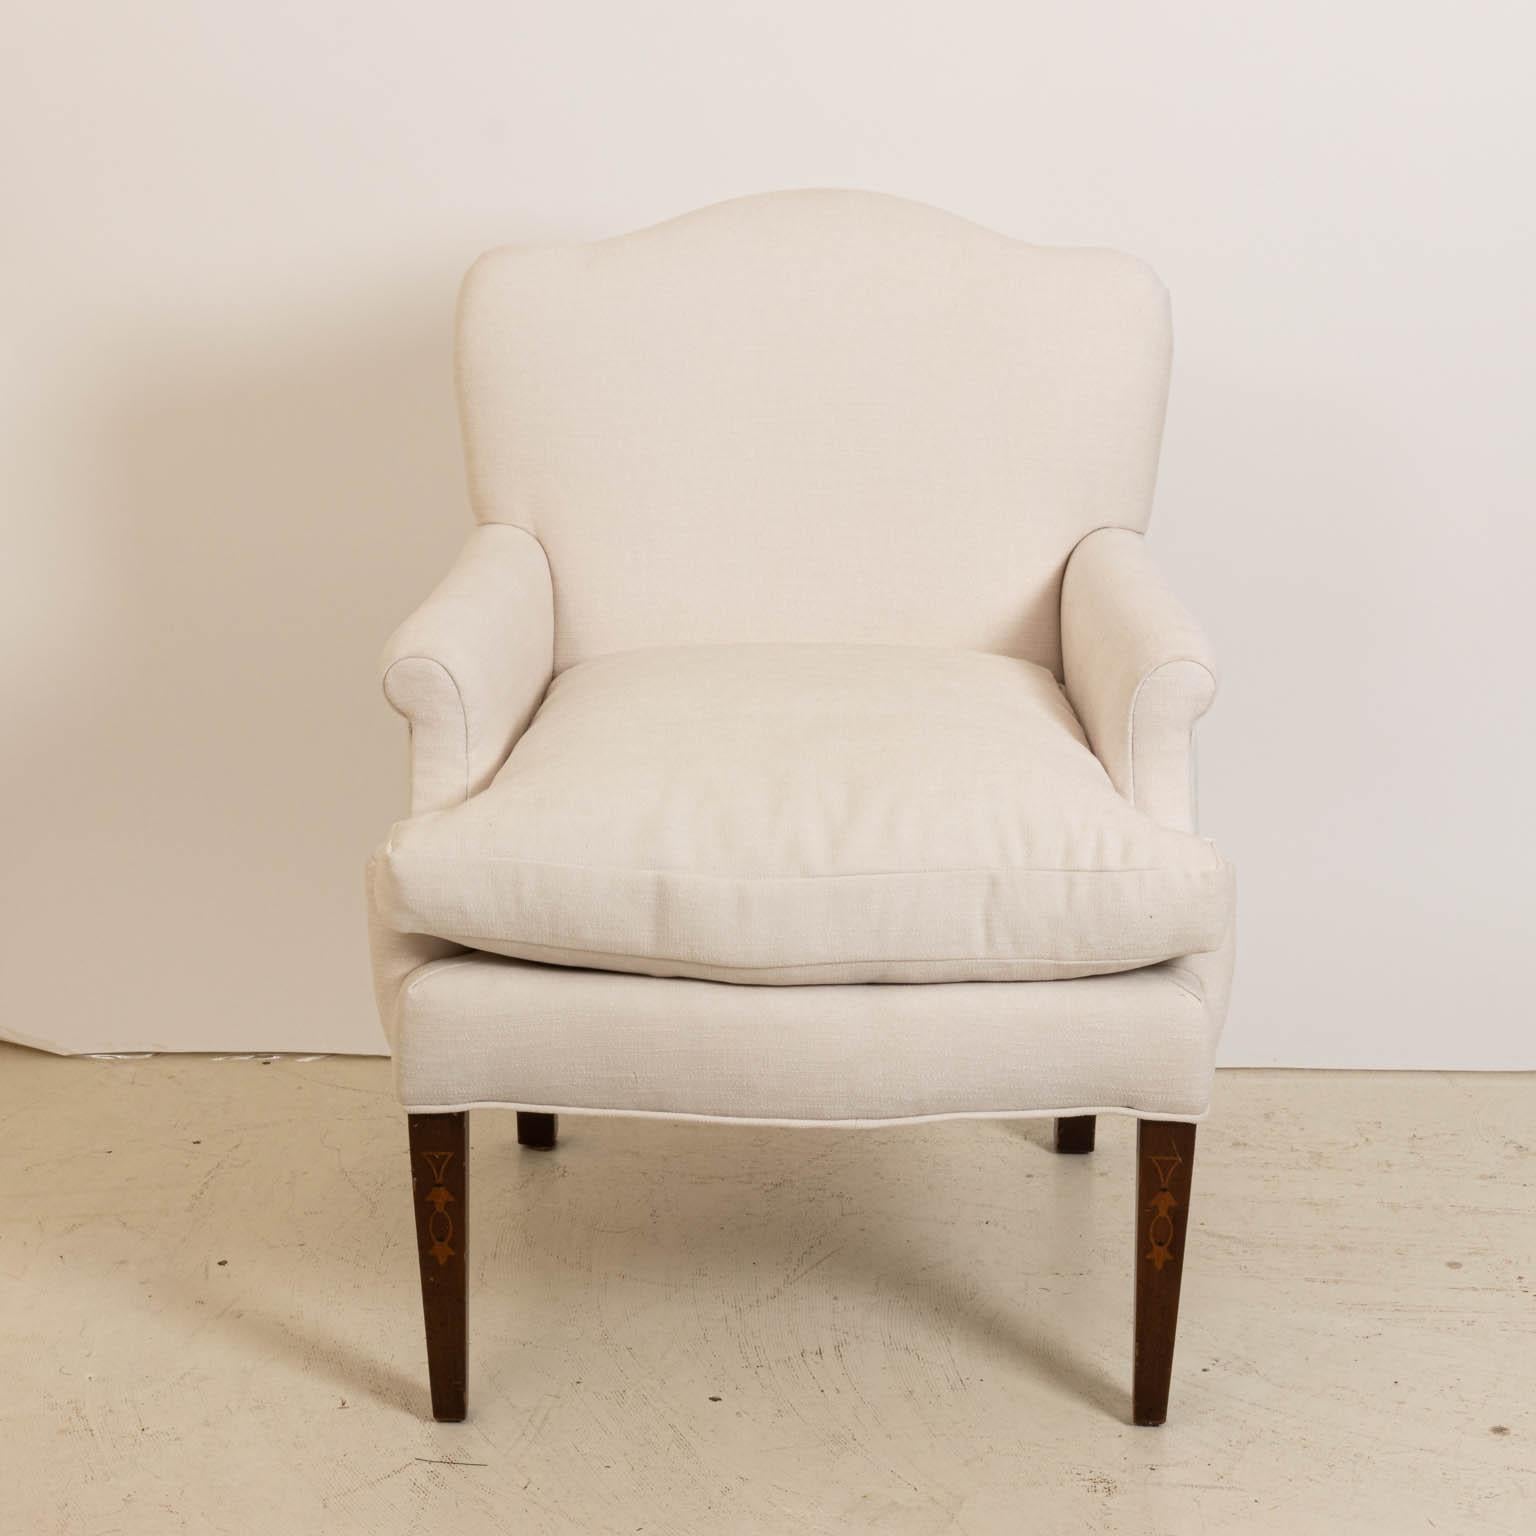 Down Pair of White Upholstered Armchairs